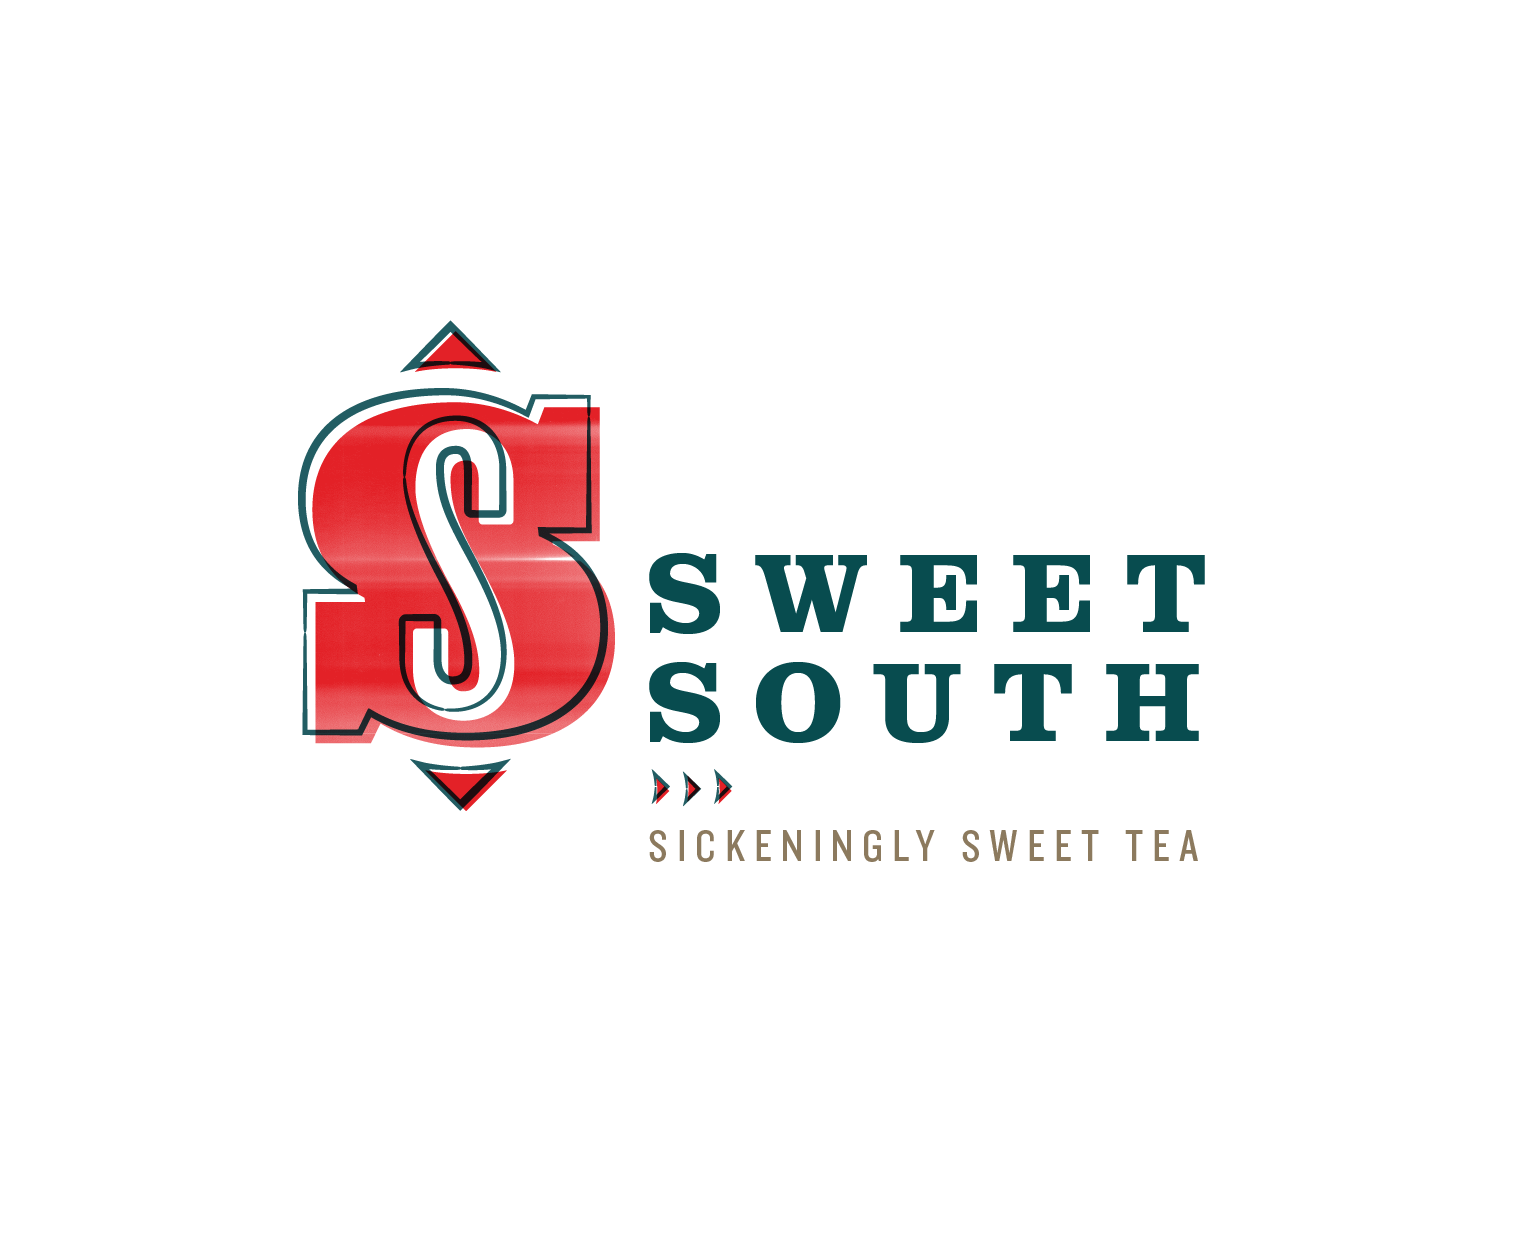 Sweet South - Brand strategy and logo design